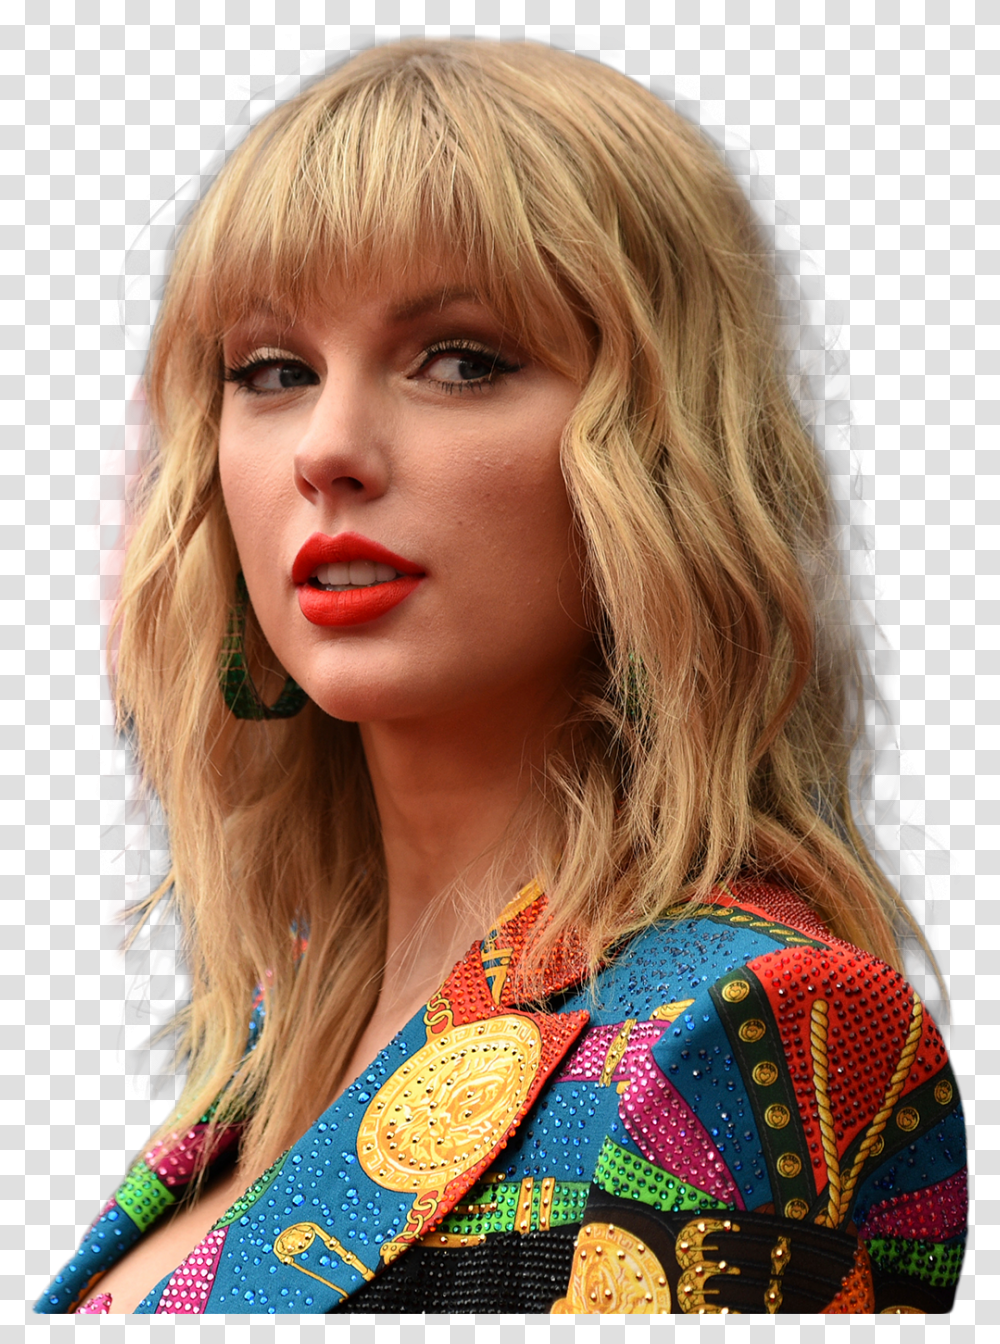 Taylor Swift Just Canceled All Her Shows In 2020 Due To The Taylor Swift Happy Birthday, Blonde, Woman, Girl, Kid Transparent Png